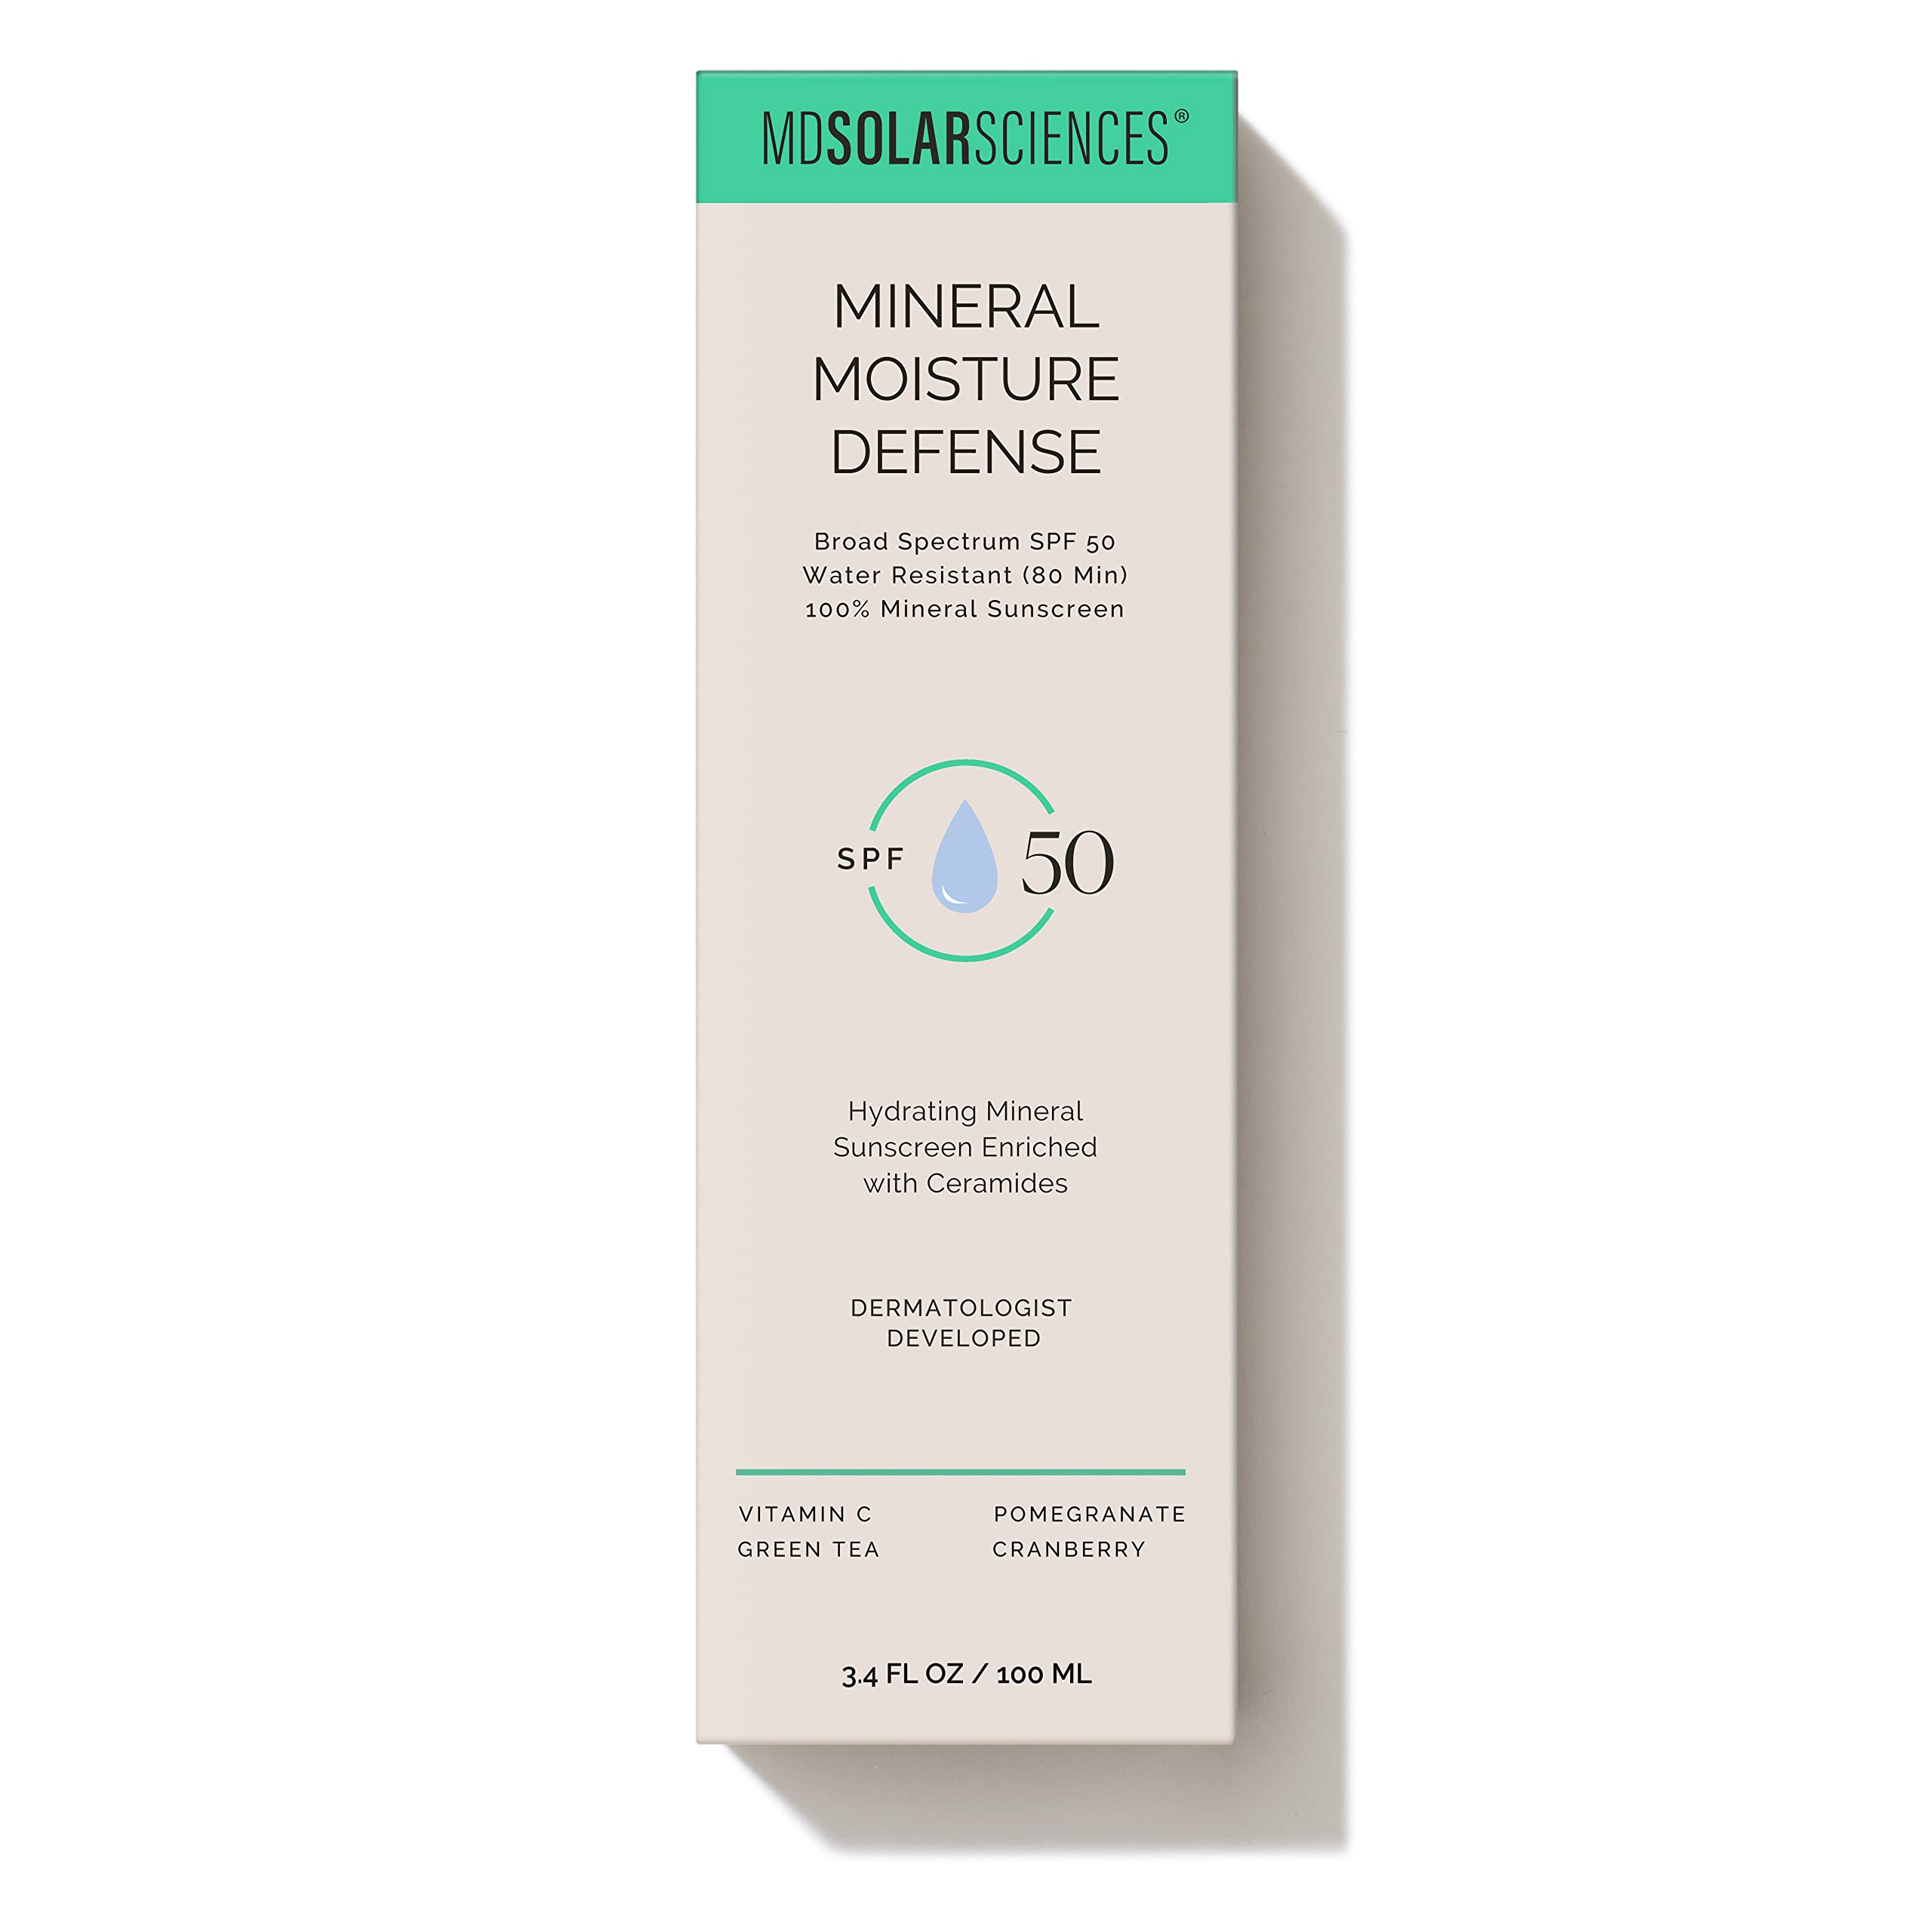 MDSolarSciences Mineral Moisture Defense SPF 50 Sunscreen for Body and Face – Water-Resistant Broad-Spectrum UV Protection – Zinc Oxide Cream, Helps Restore Skin’s Natural Moisture Barrier, 3.4 Fl Oz